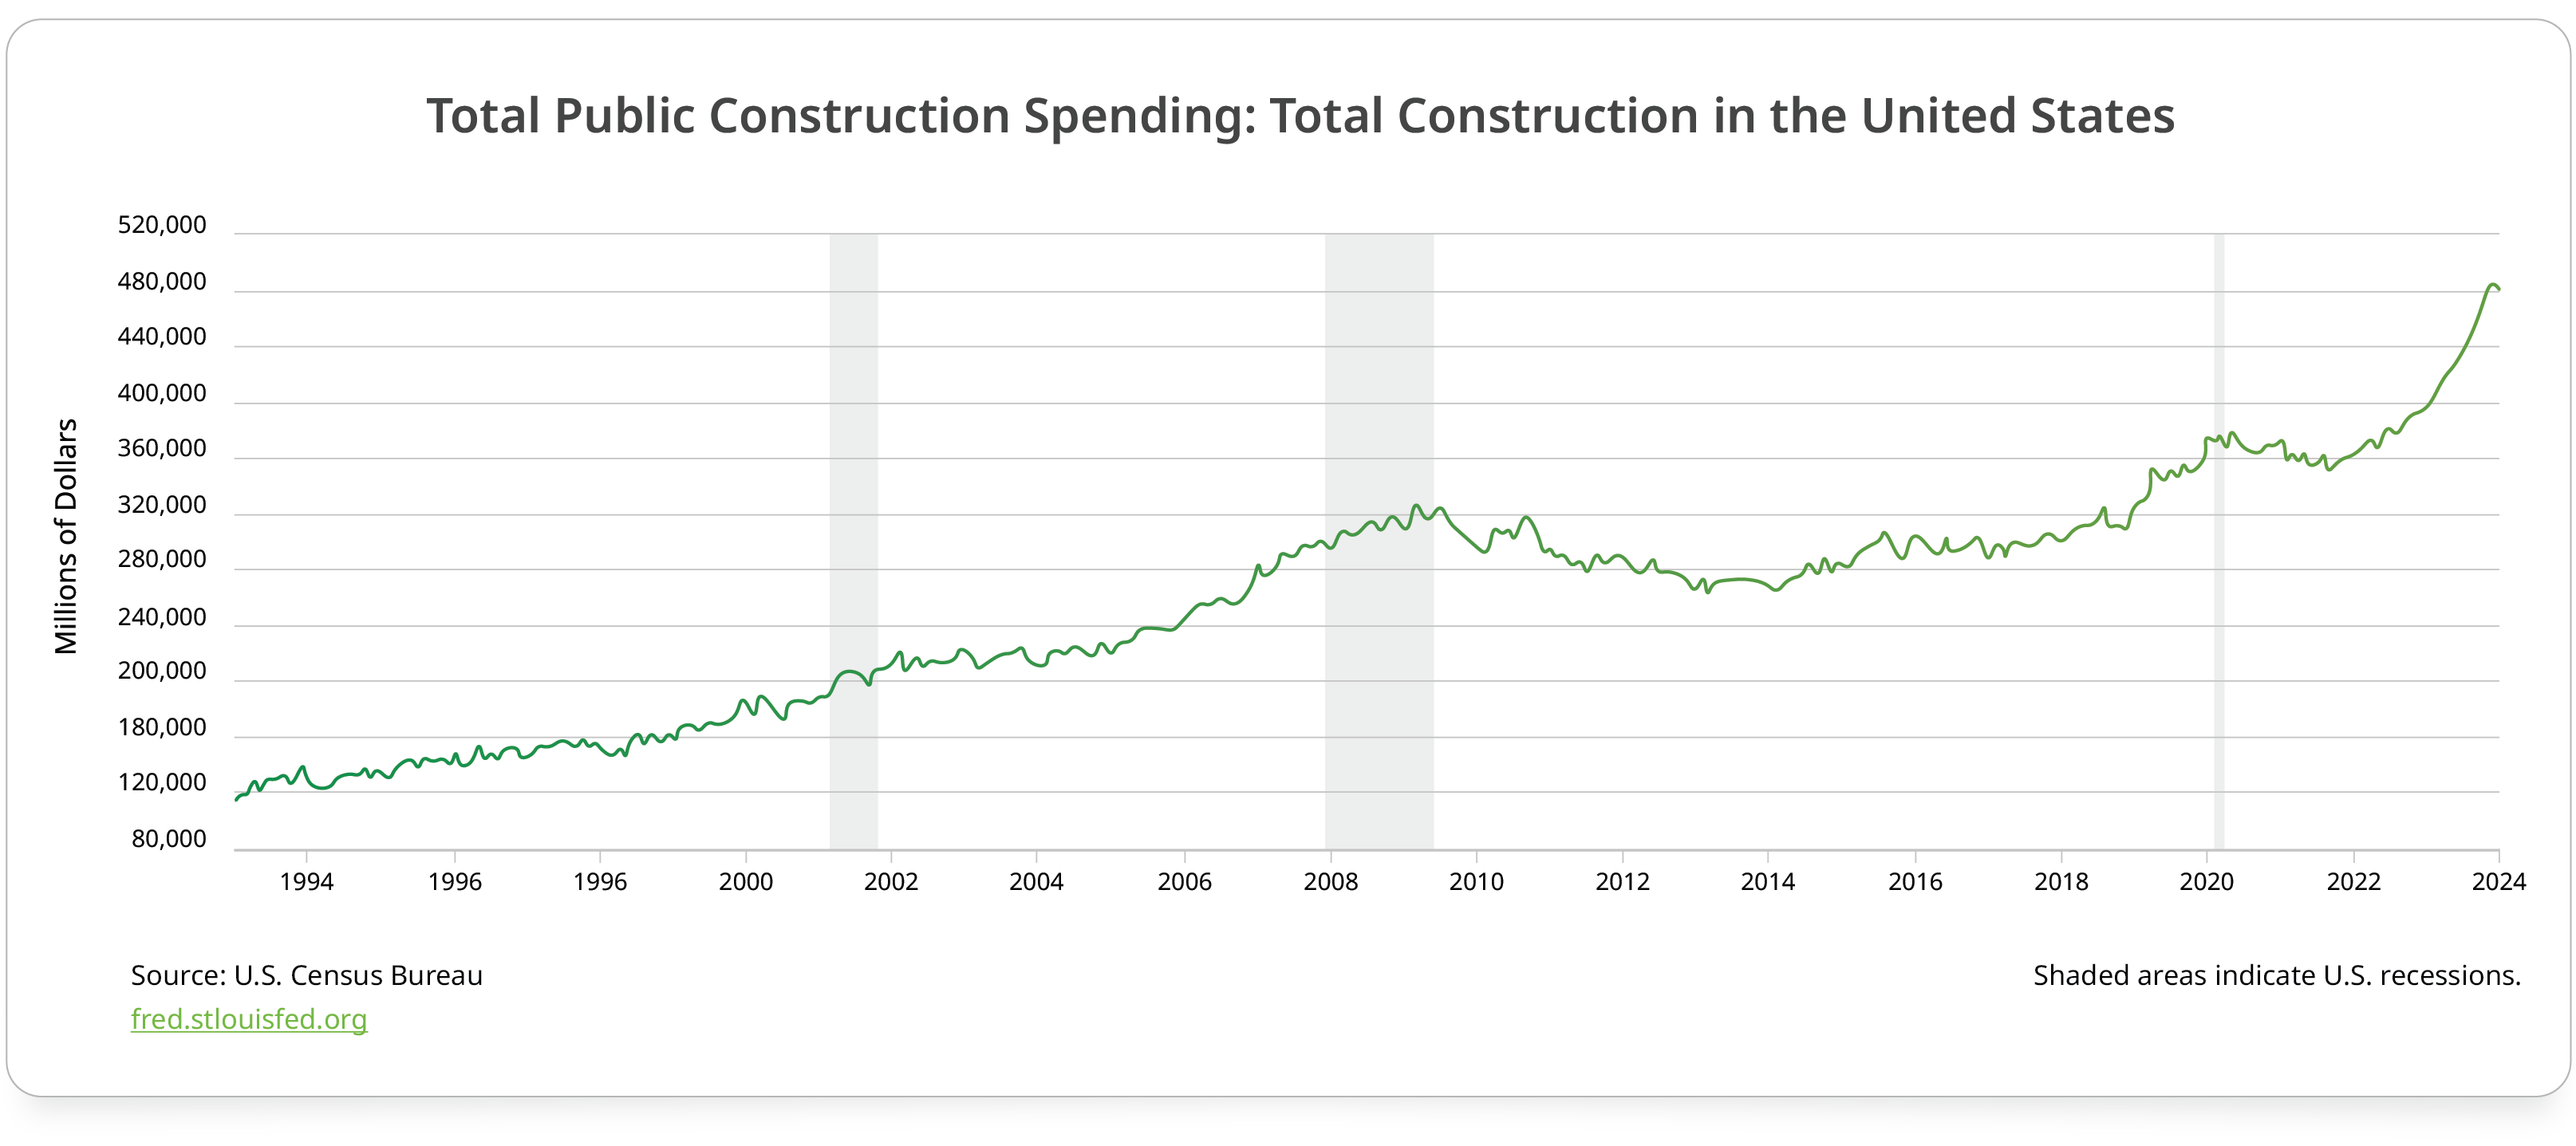 Total Public Construction Spending: Total Construction in the United States